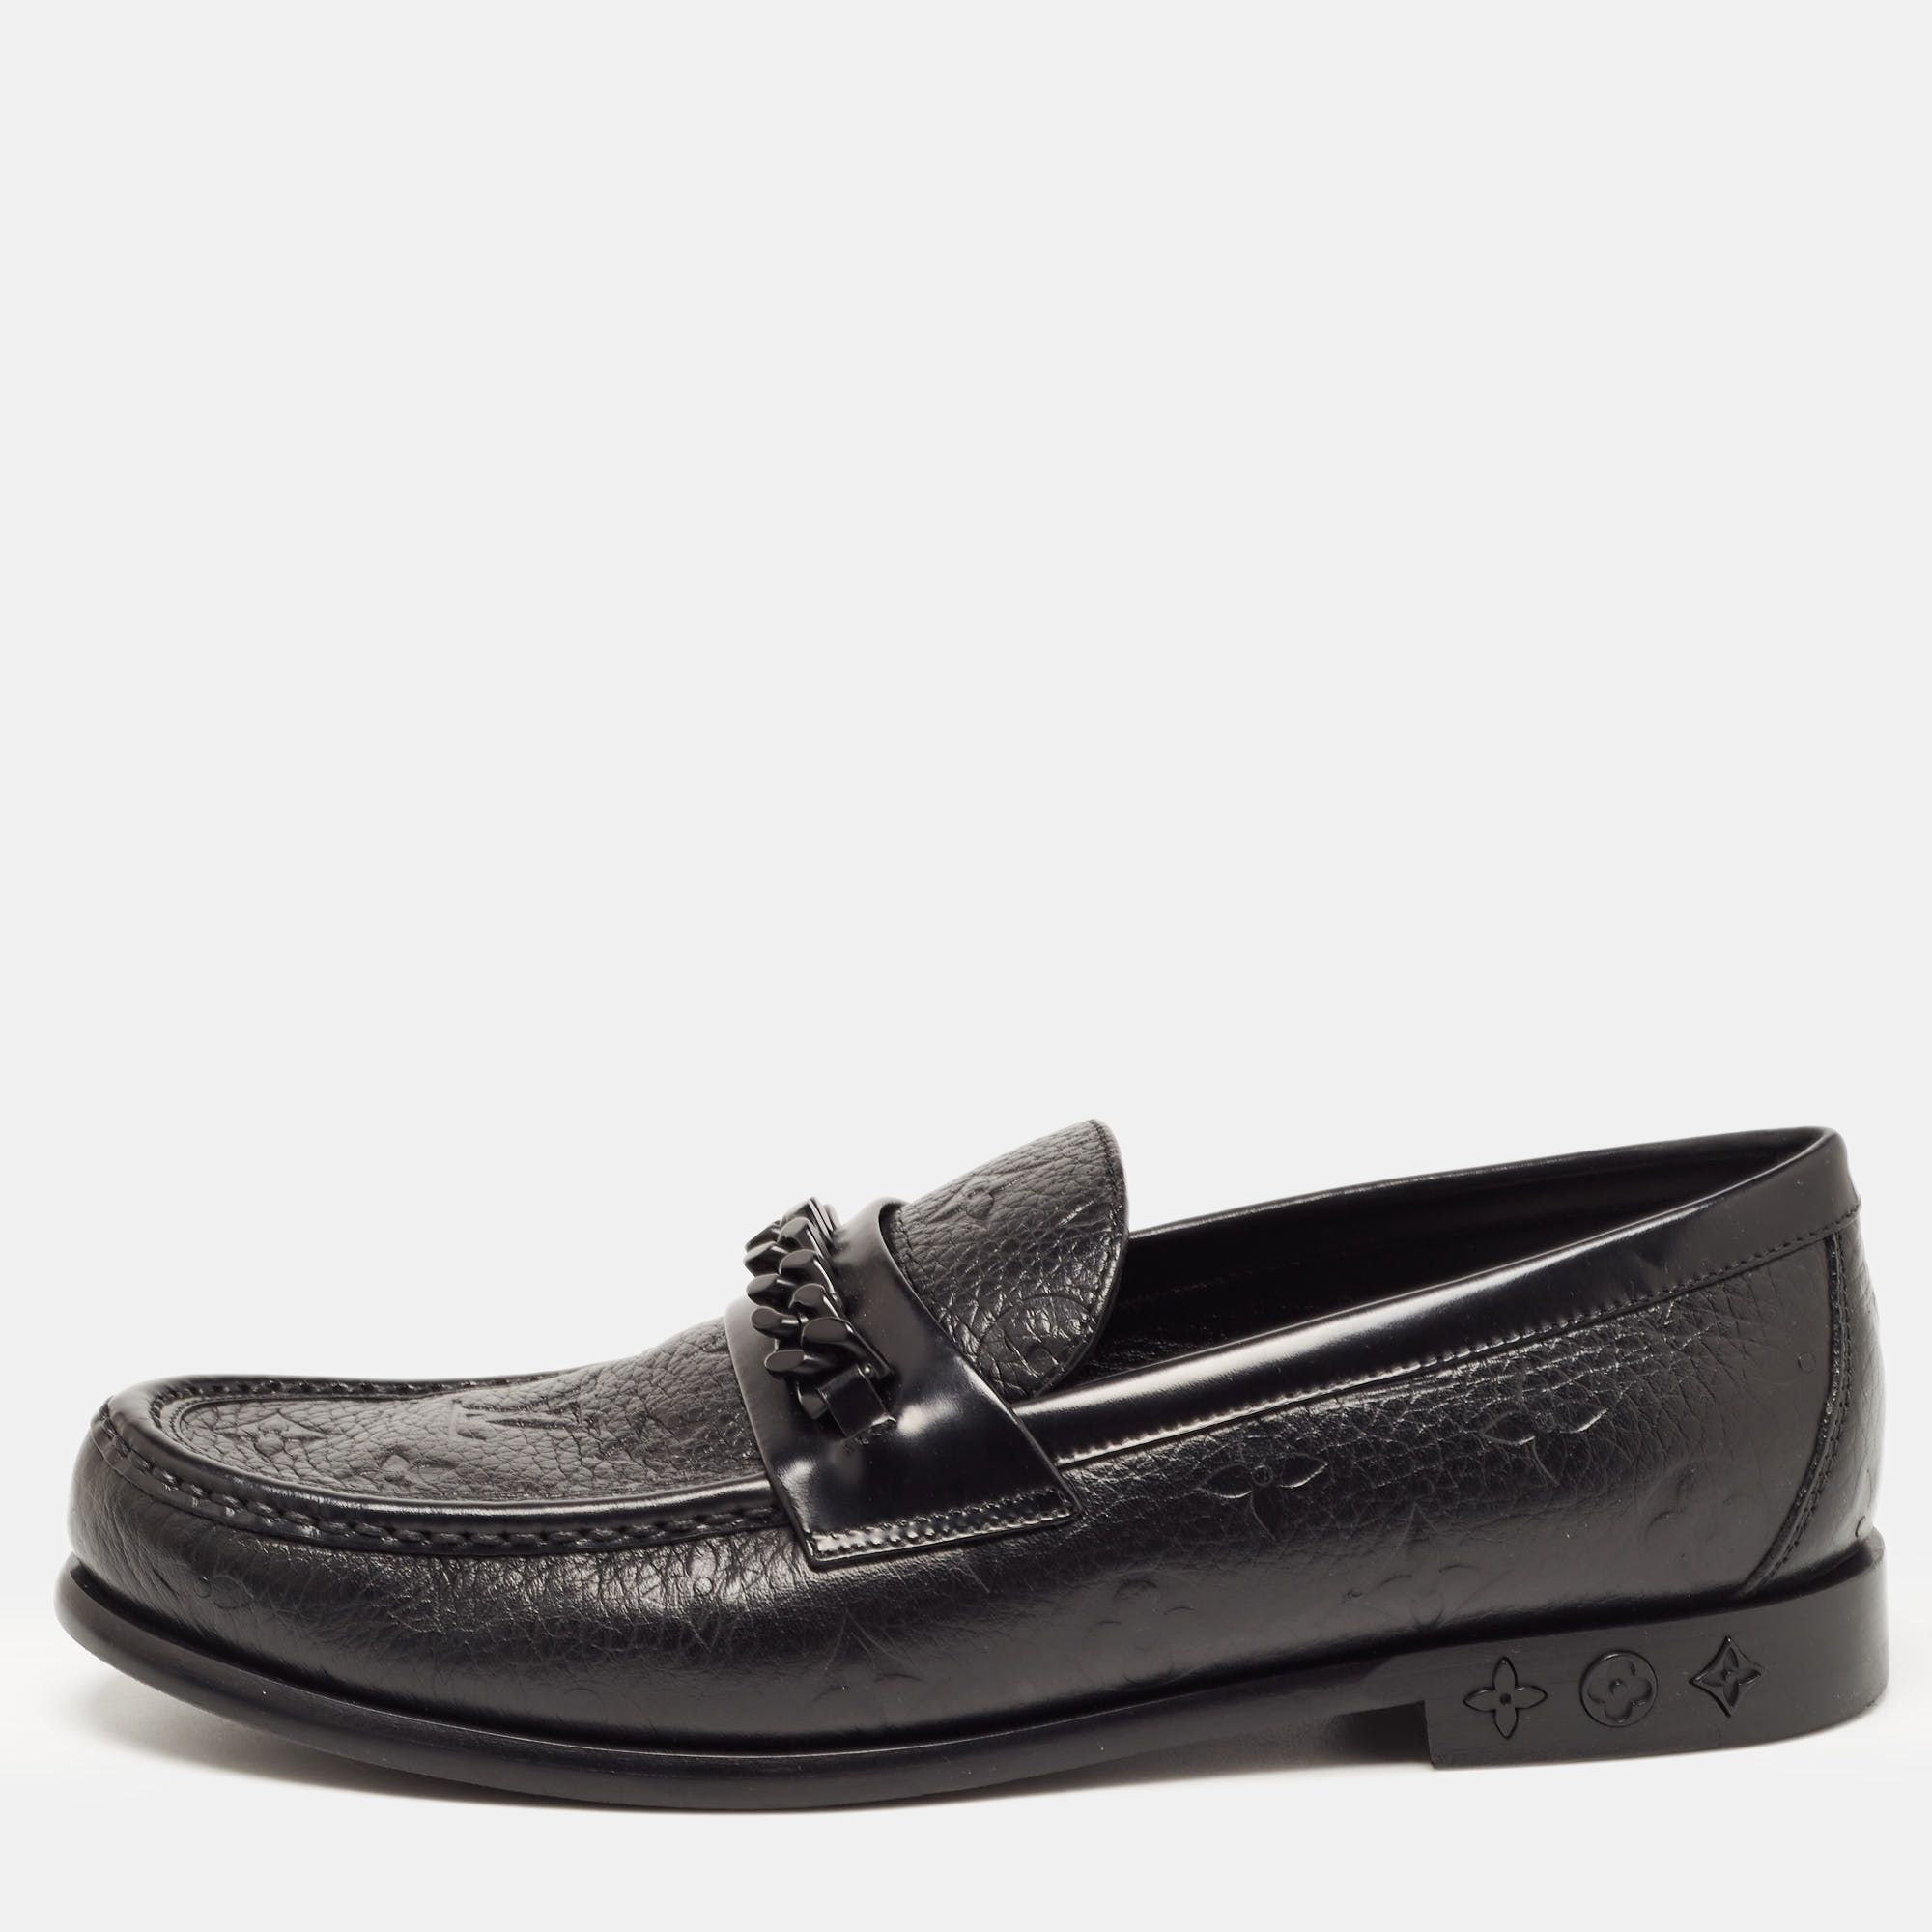 Pre-owned Louis Vuitton Black Leather Slip On Loafers Size 40.5